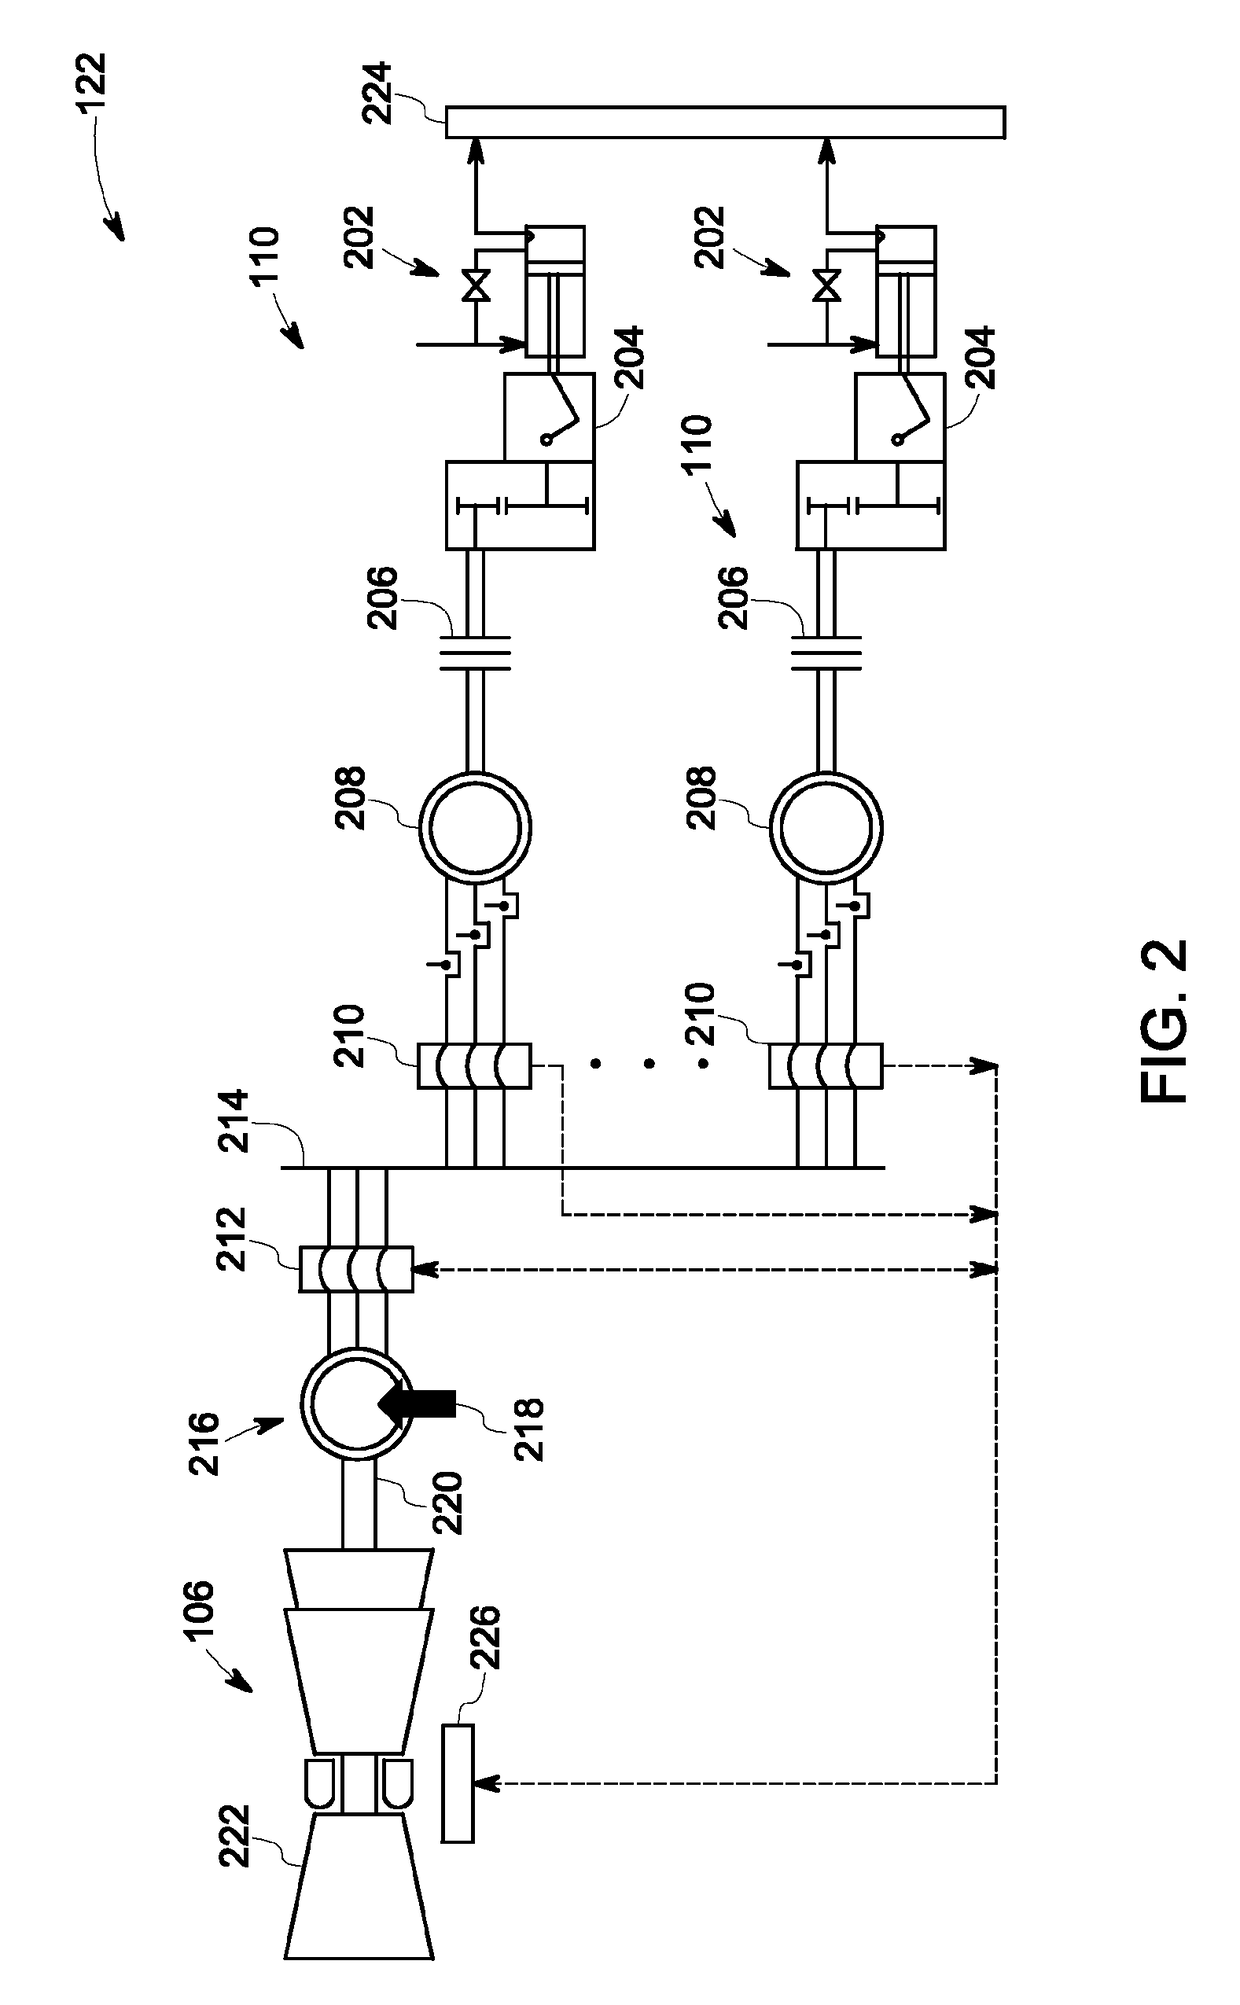 System and method for power management of pumping system